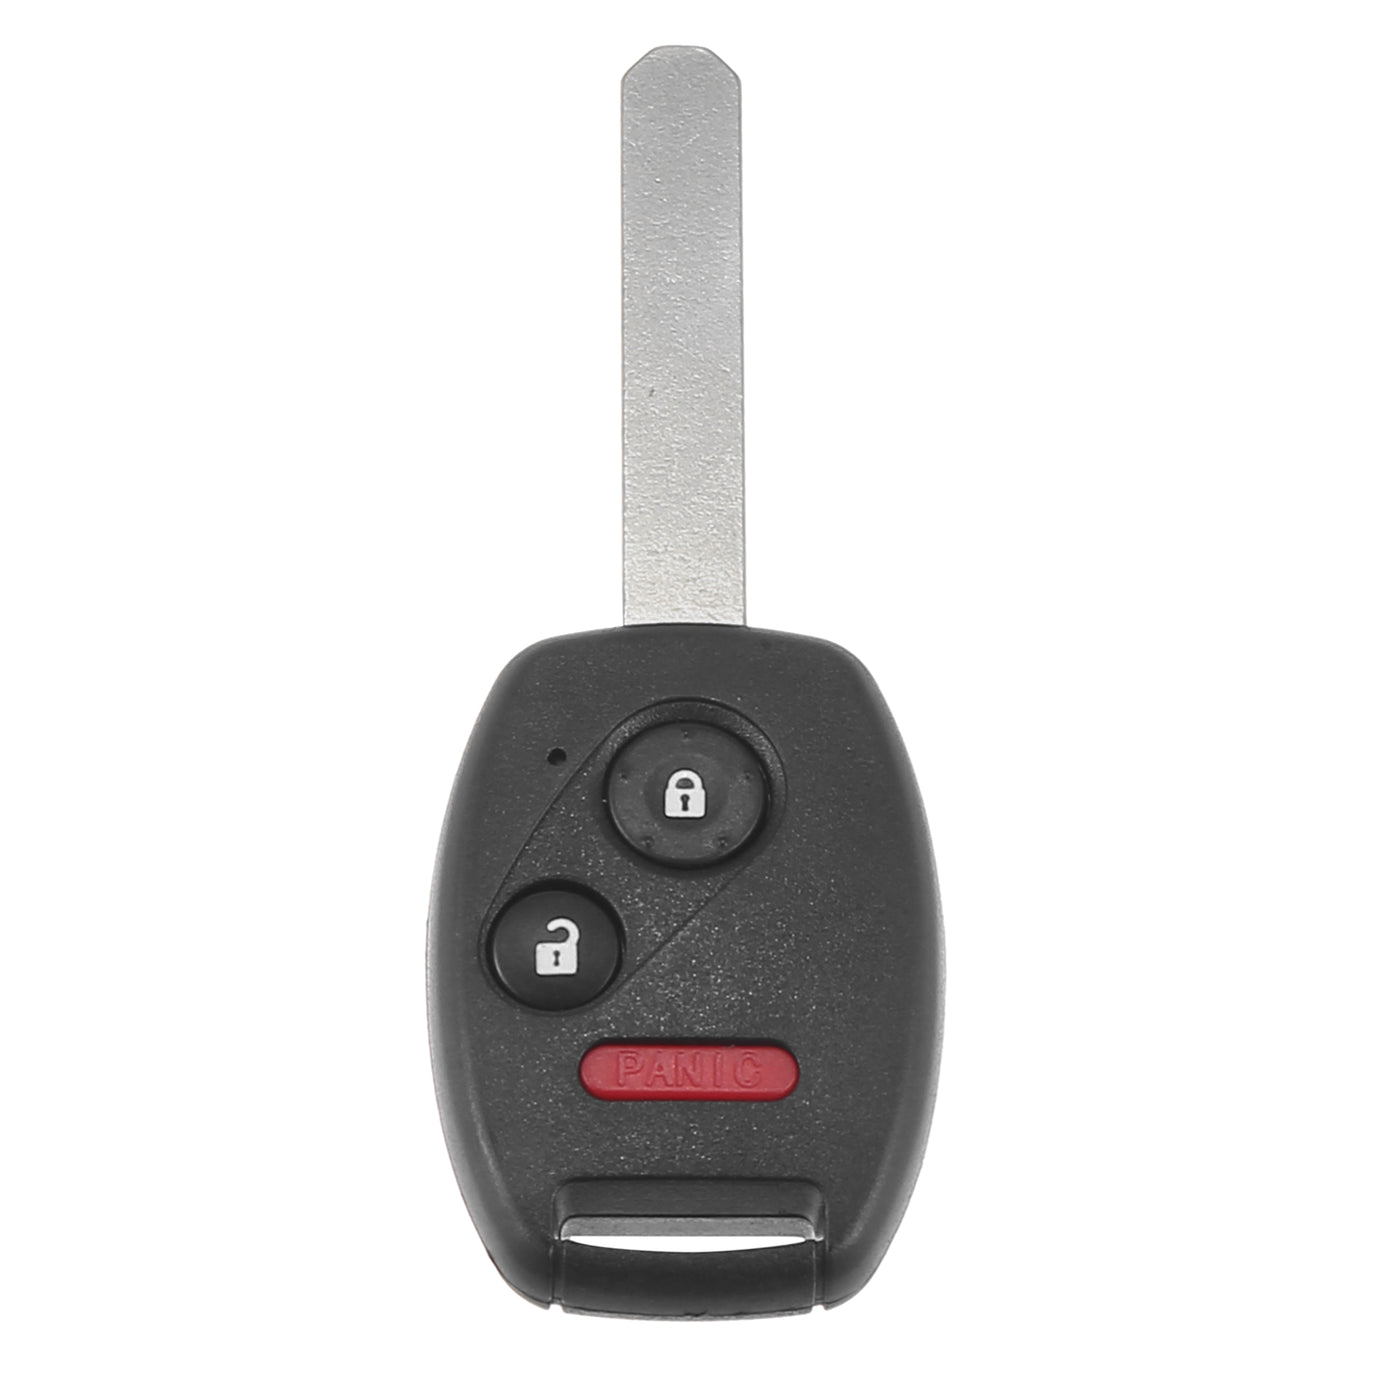 X AUTOHAUX 433MHz CWTWB1U545 Replacement Smart Proximity Keyless Entry Remote Key Fob for Honda Pilot 2005-2008 3 Buttons with Door Key 46 Chip Uncut Car Ignition Key Fob